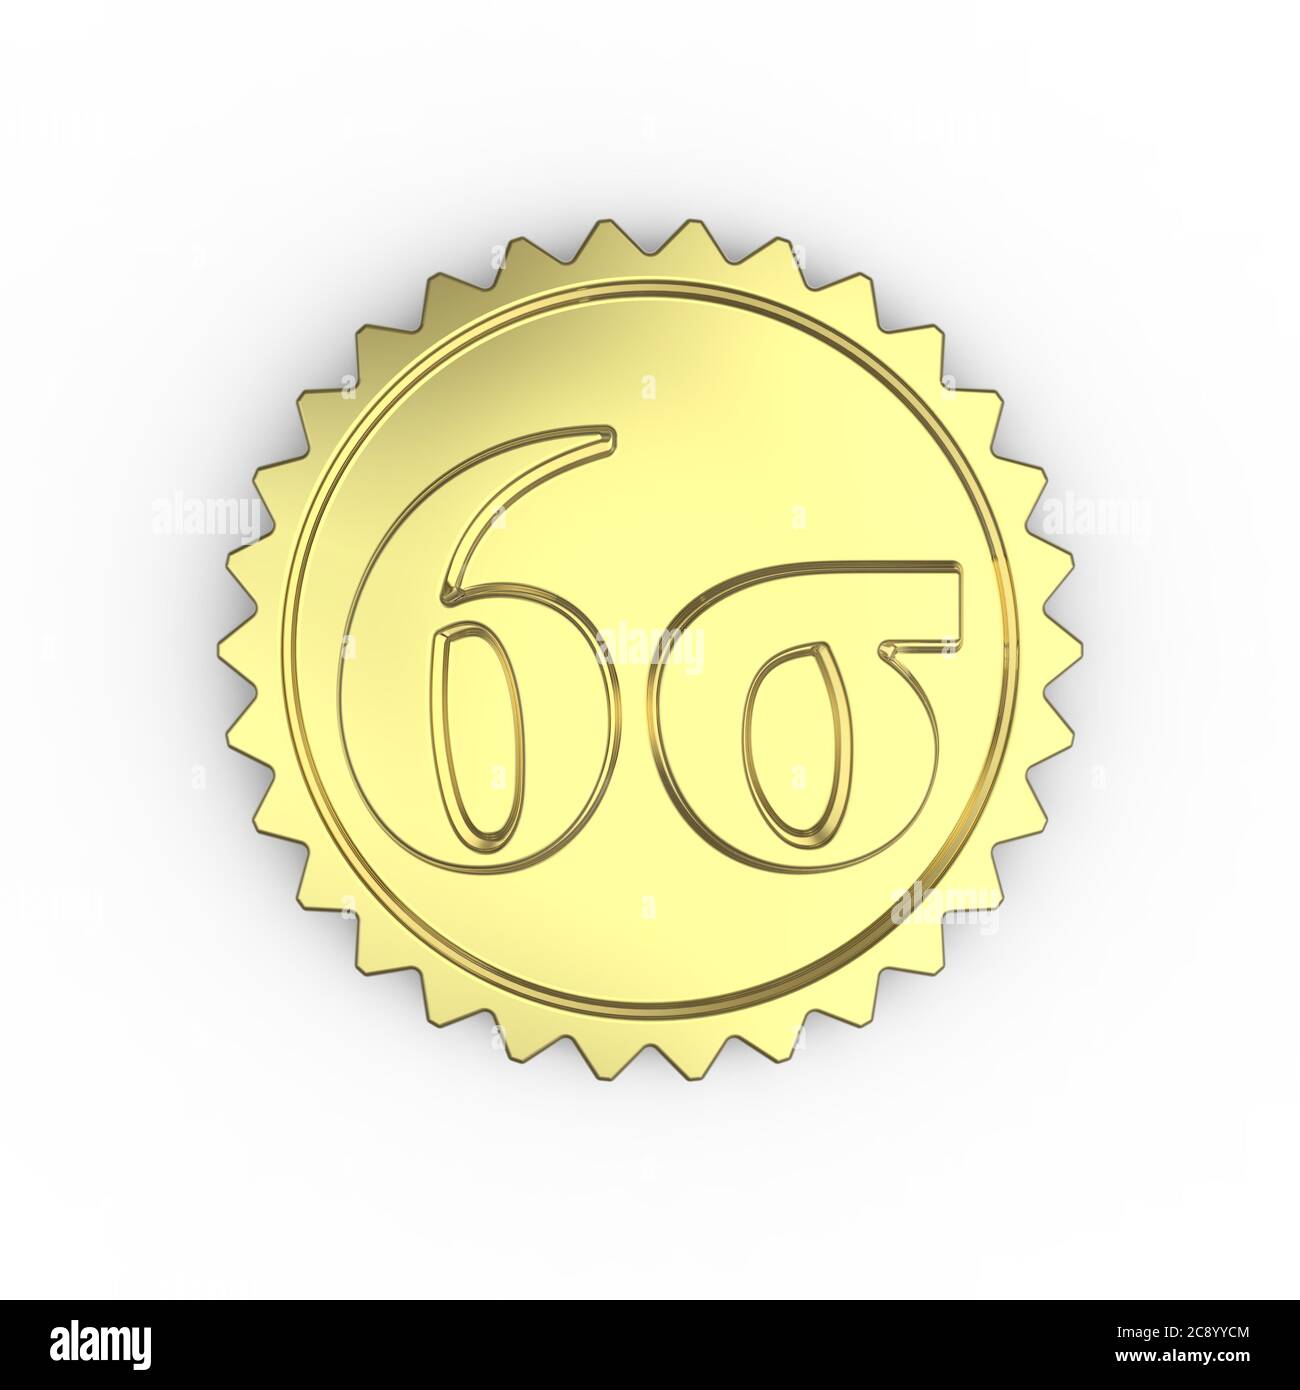 Gold quality mark with a six sigma symbol on a white background Stock Photo